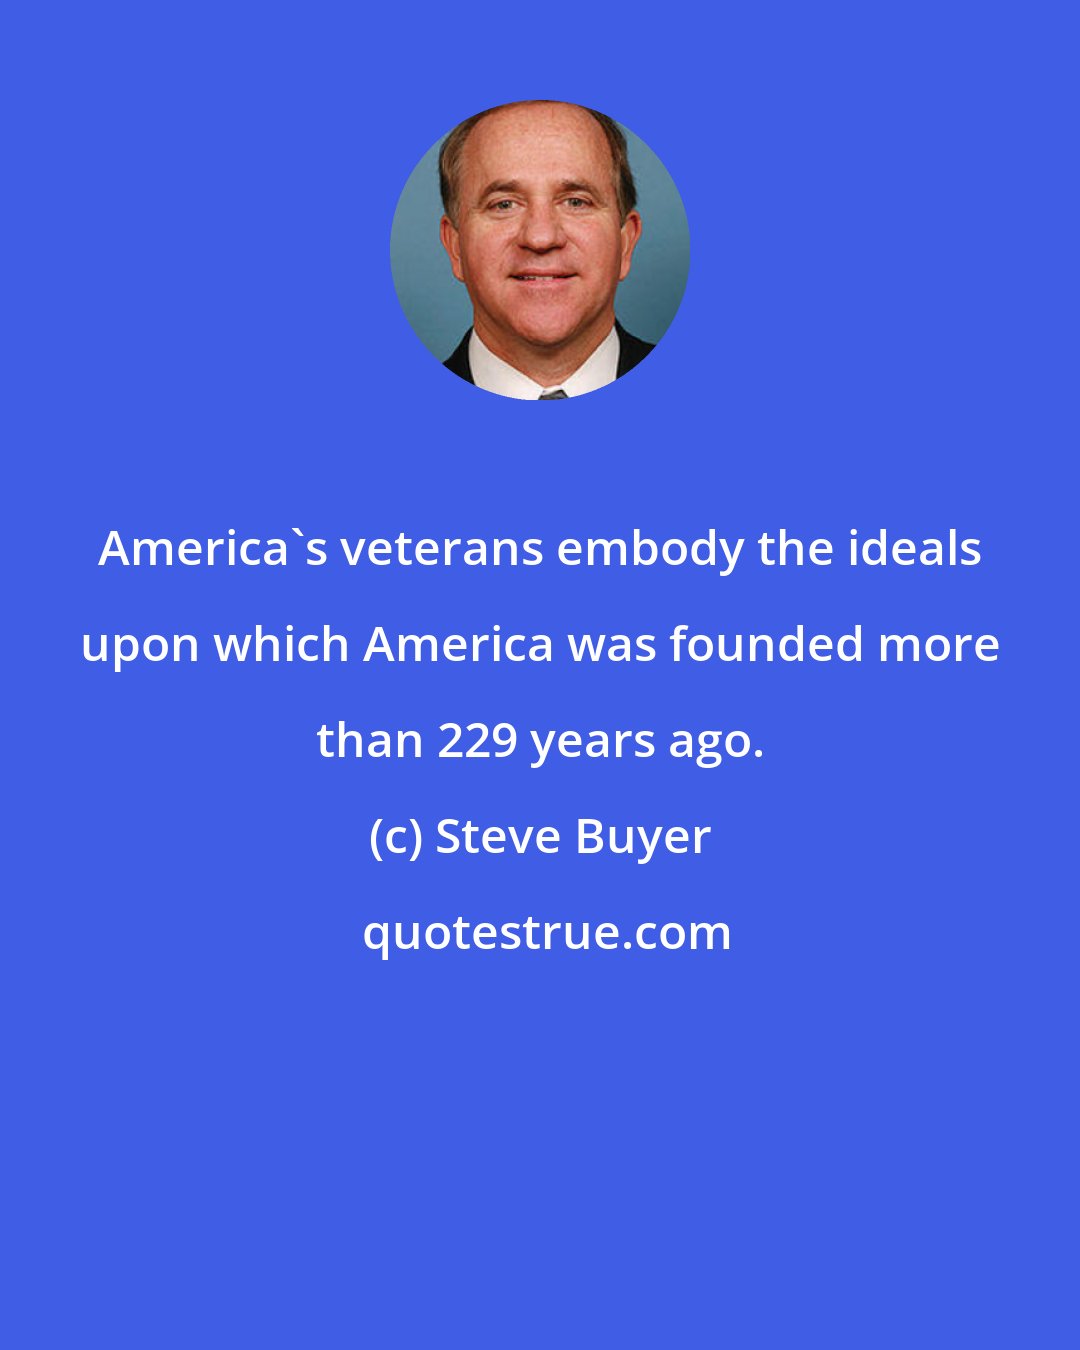 Steve Buyer: America's veterans embody the ideals upon which America was founded more than 229 years ago.